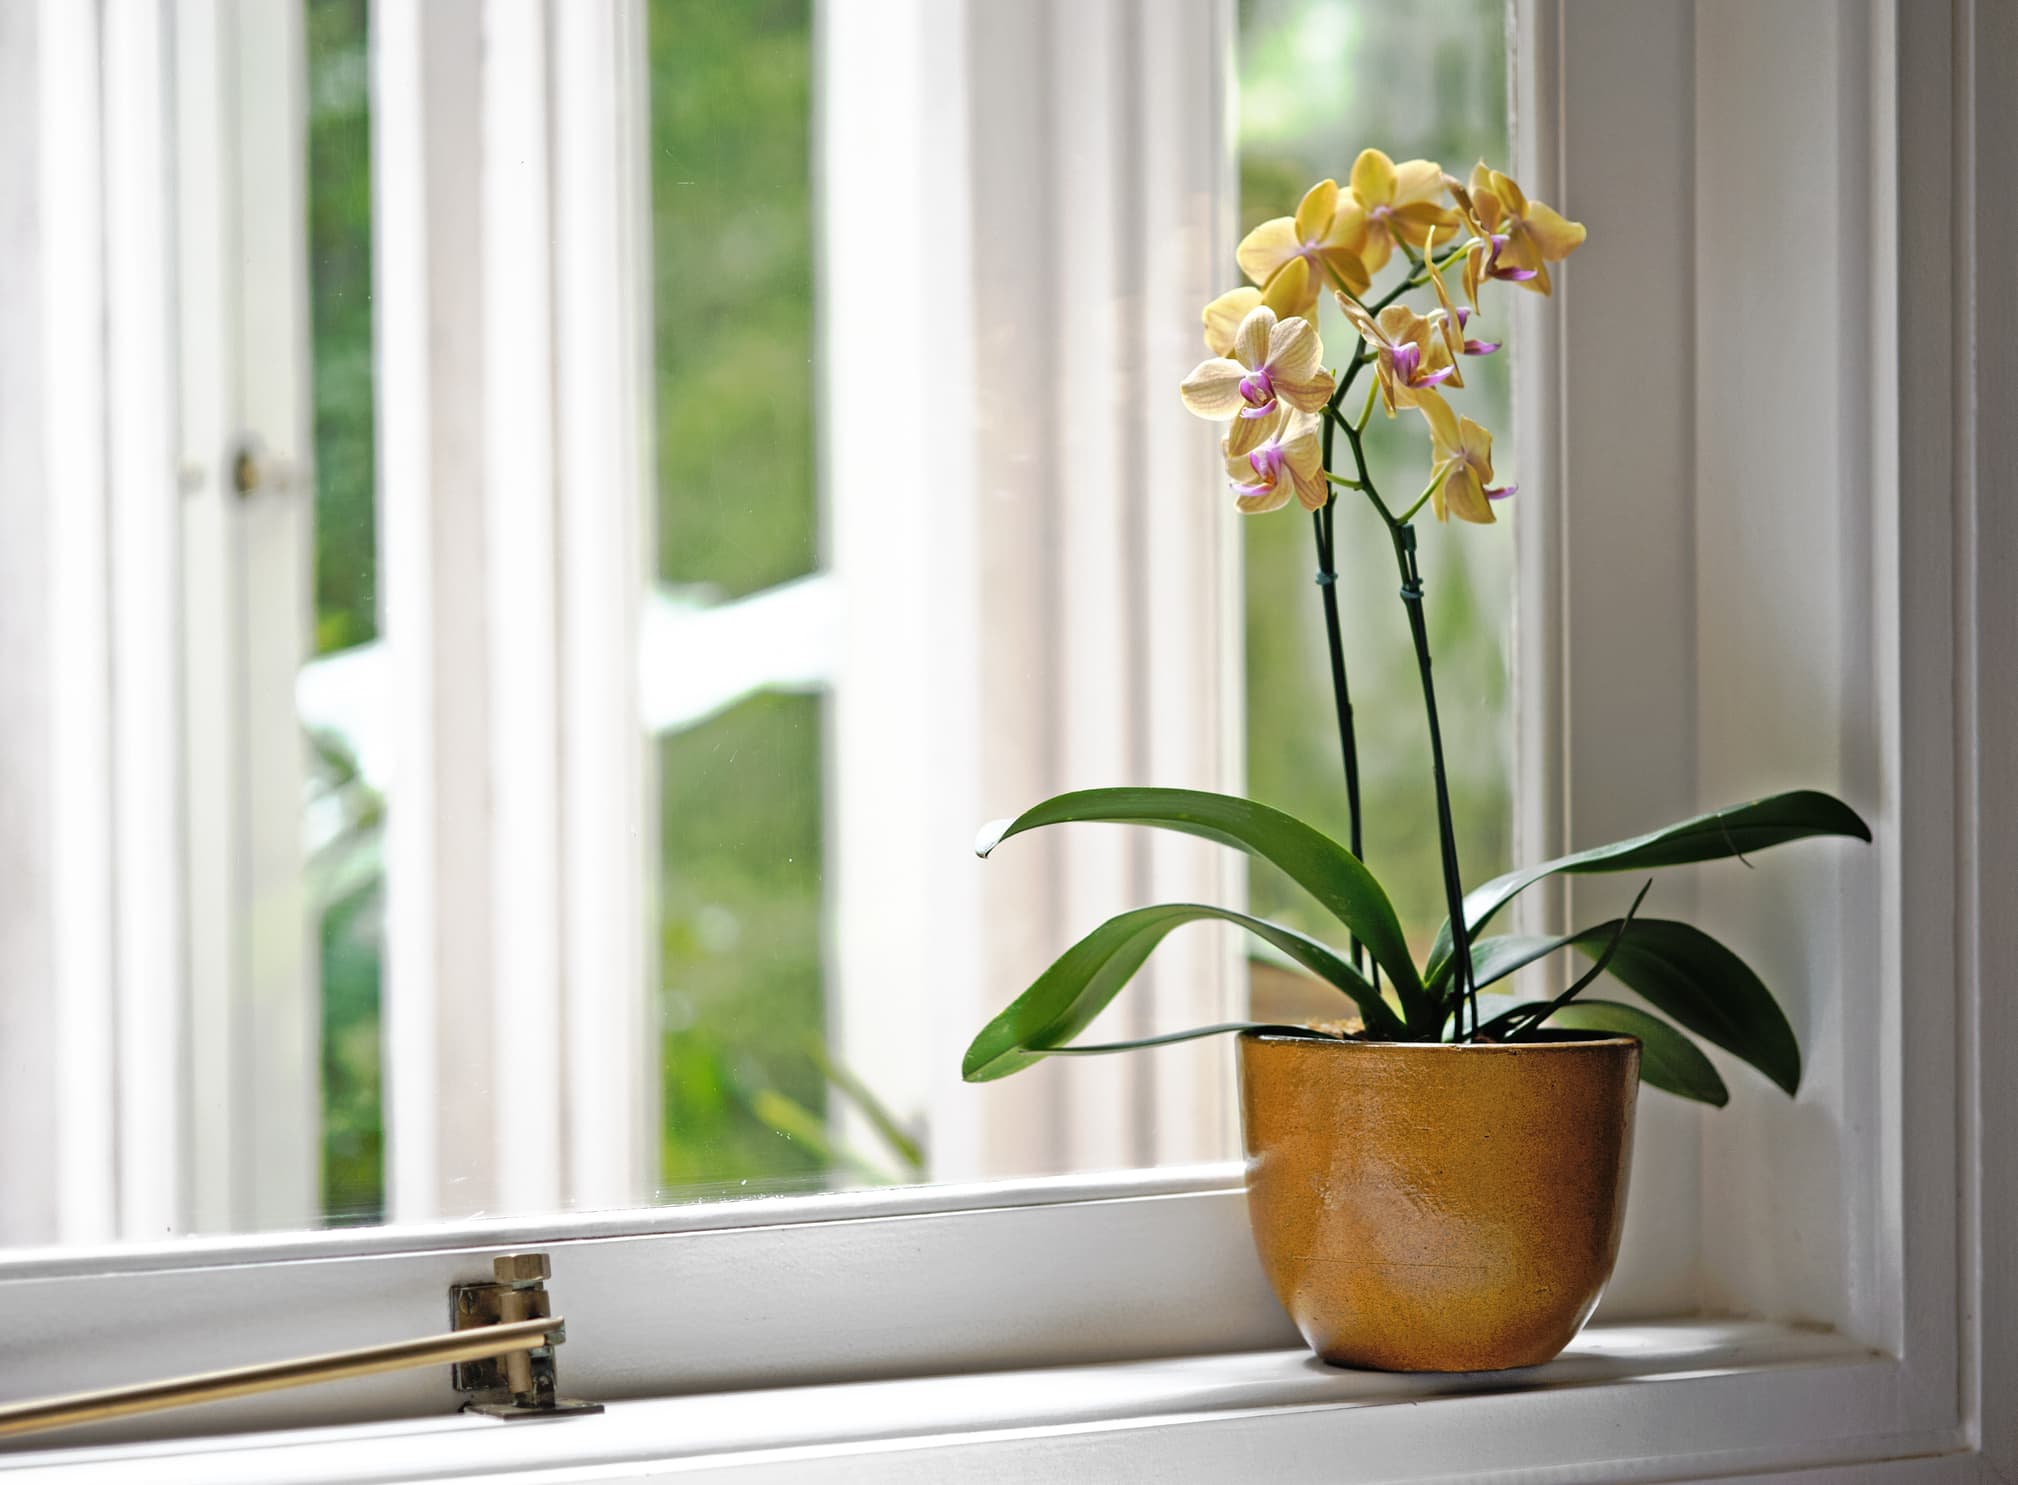 How to Water Orchids in Moss: 3 Vital Tips for Success